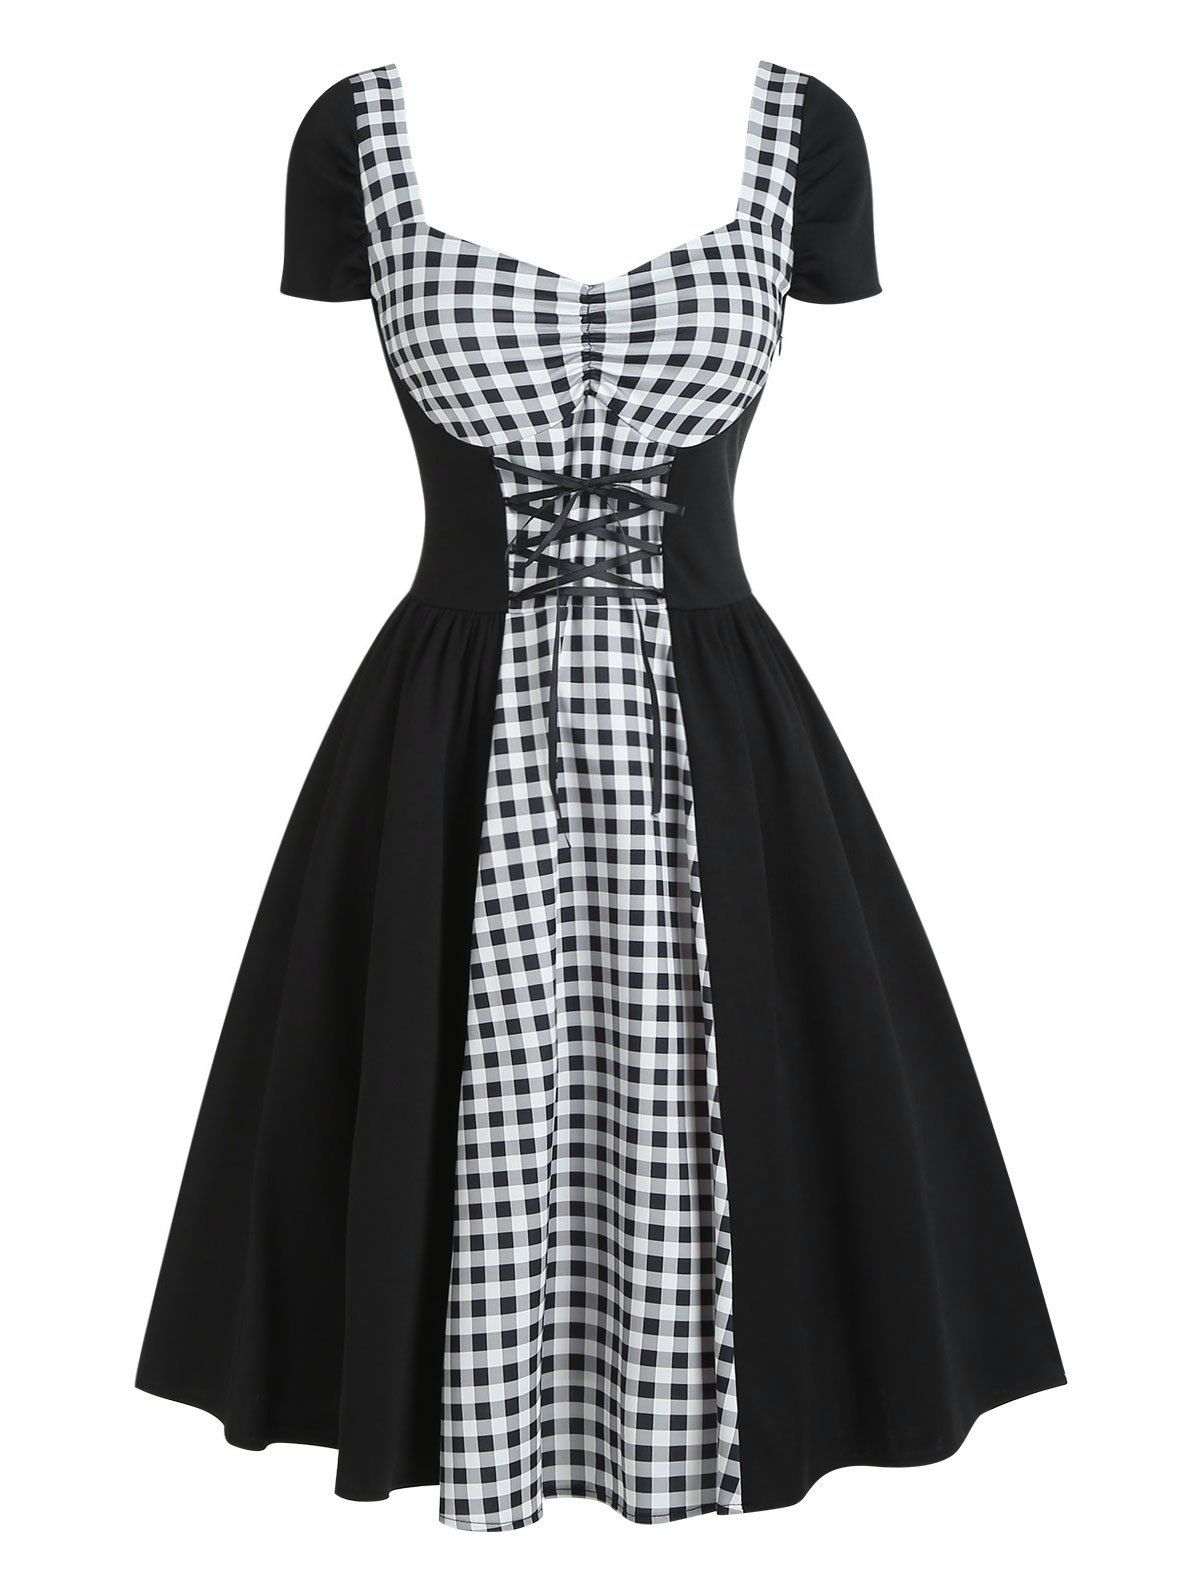 Star Gingham Lace Up Ruched Vintage Dress 